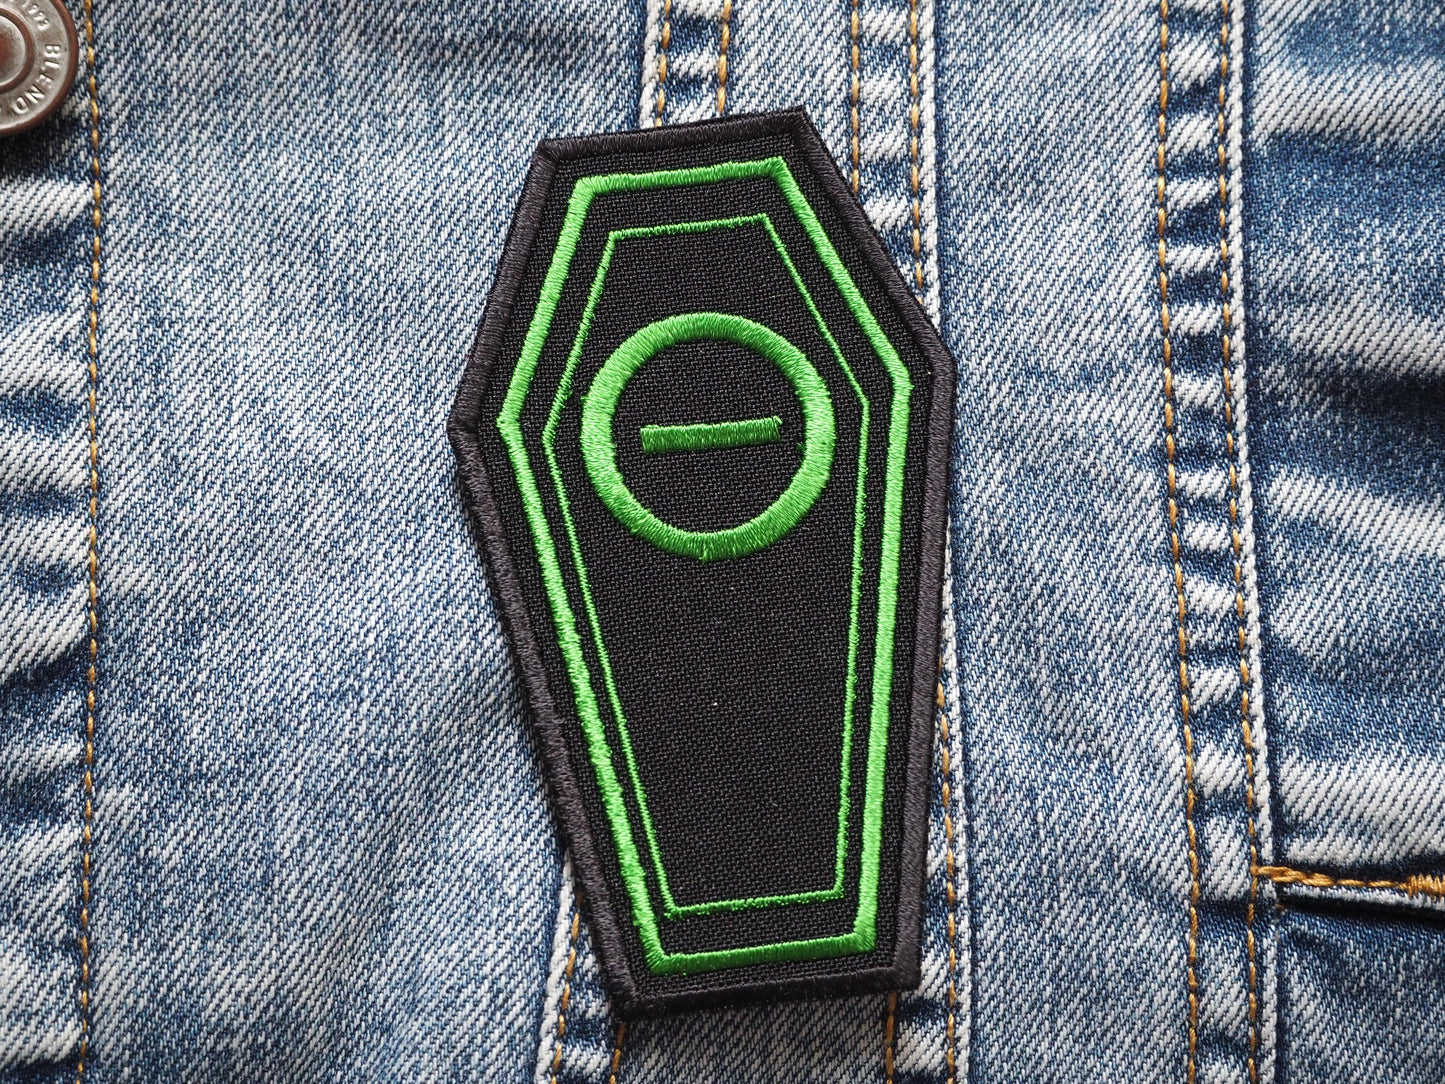 Type O' Negative Coffin Embroidered Patch